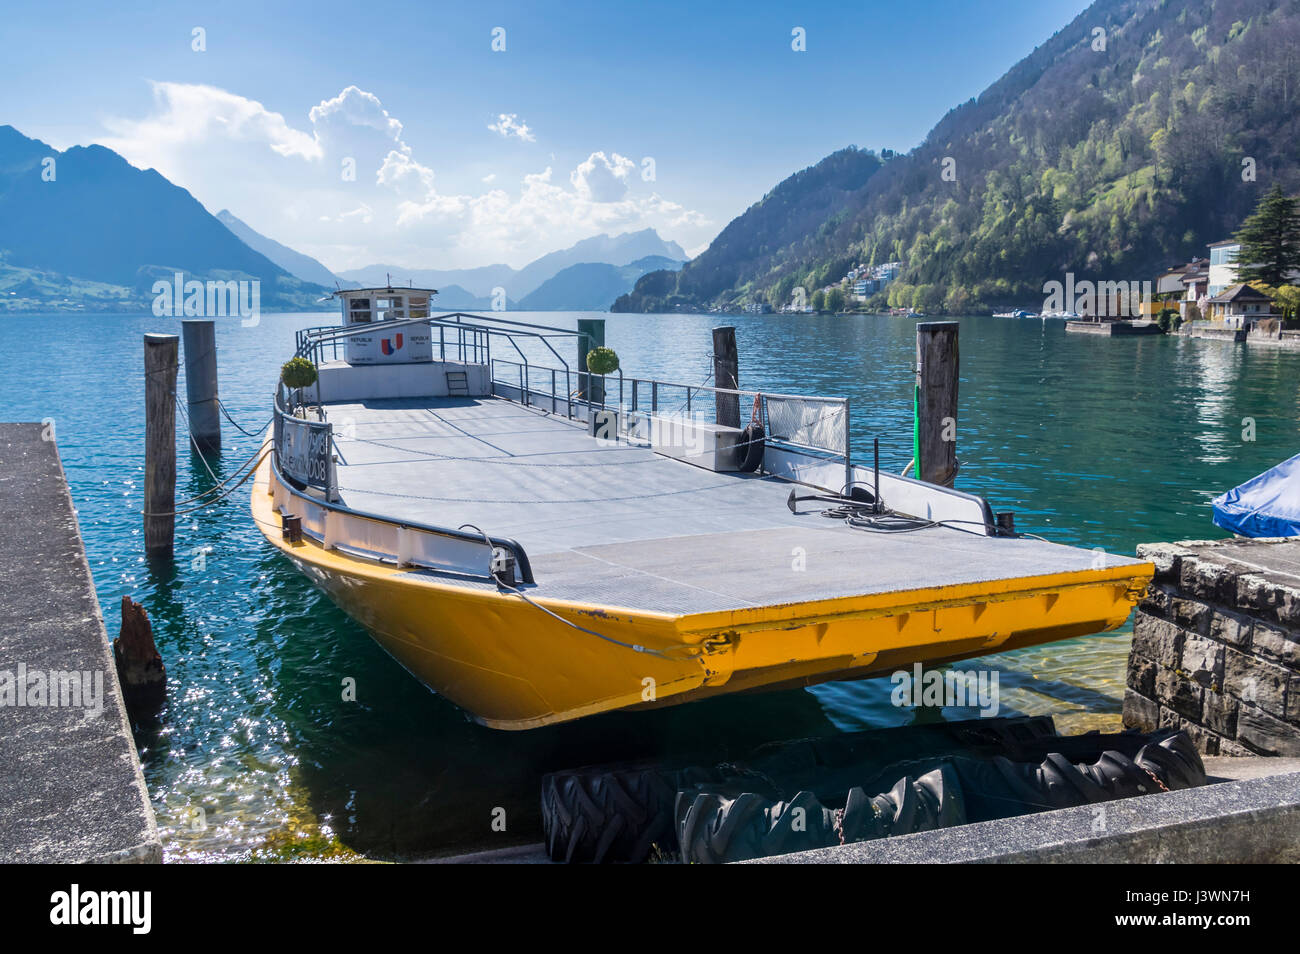 Self-propelled barge 'Republik', built in 1908, mooring in Gersau, Switzerland. This type of flat-bottomed boats is locally referred to as 'Nauen'. Stock Photo